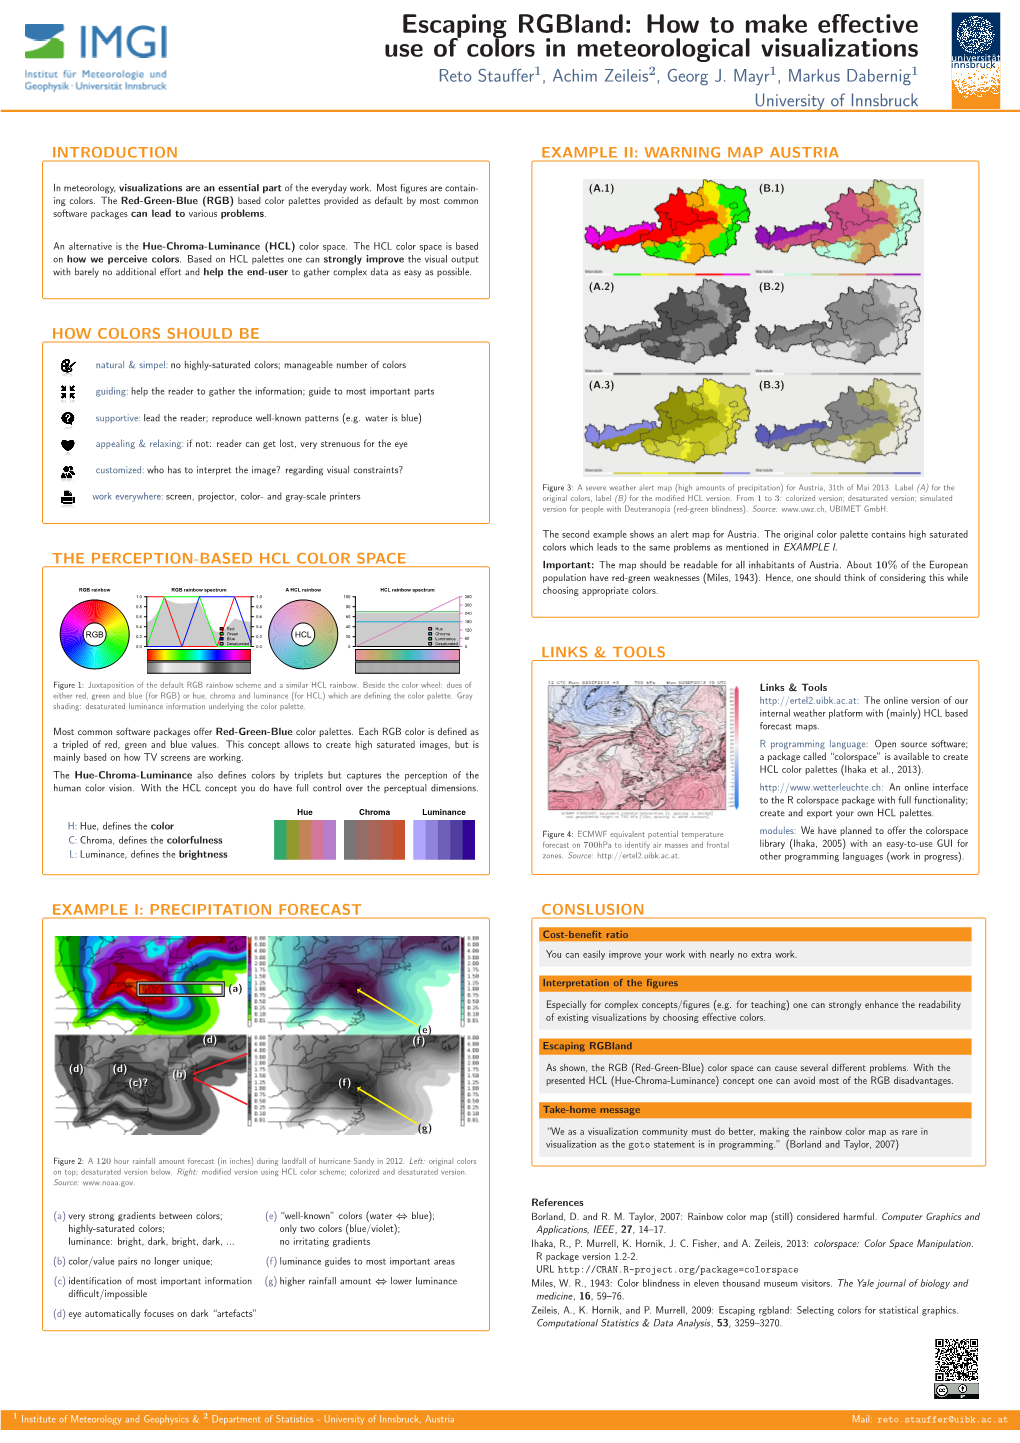 How to Make Effective Use of Colors in Meteorological Visualizations